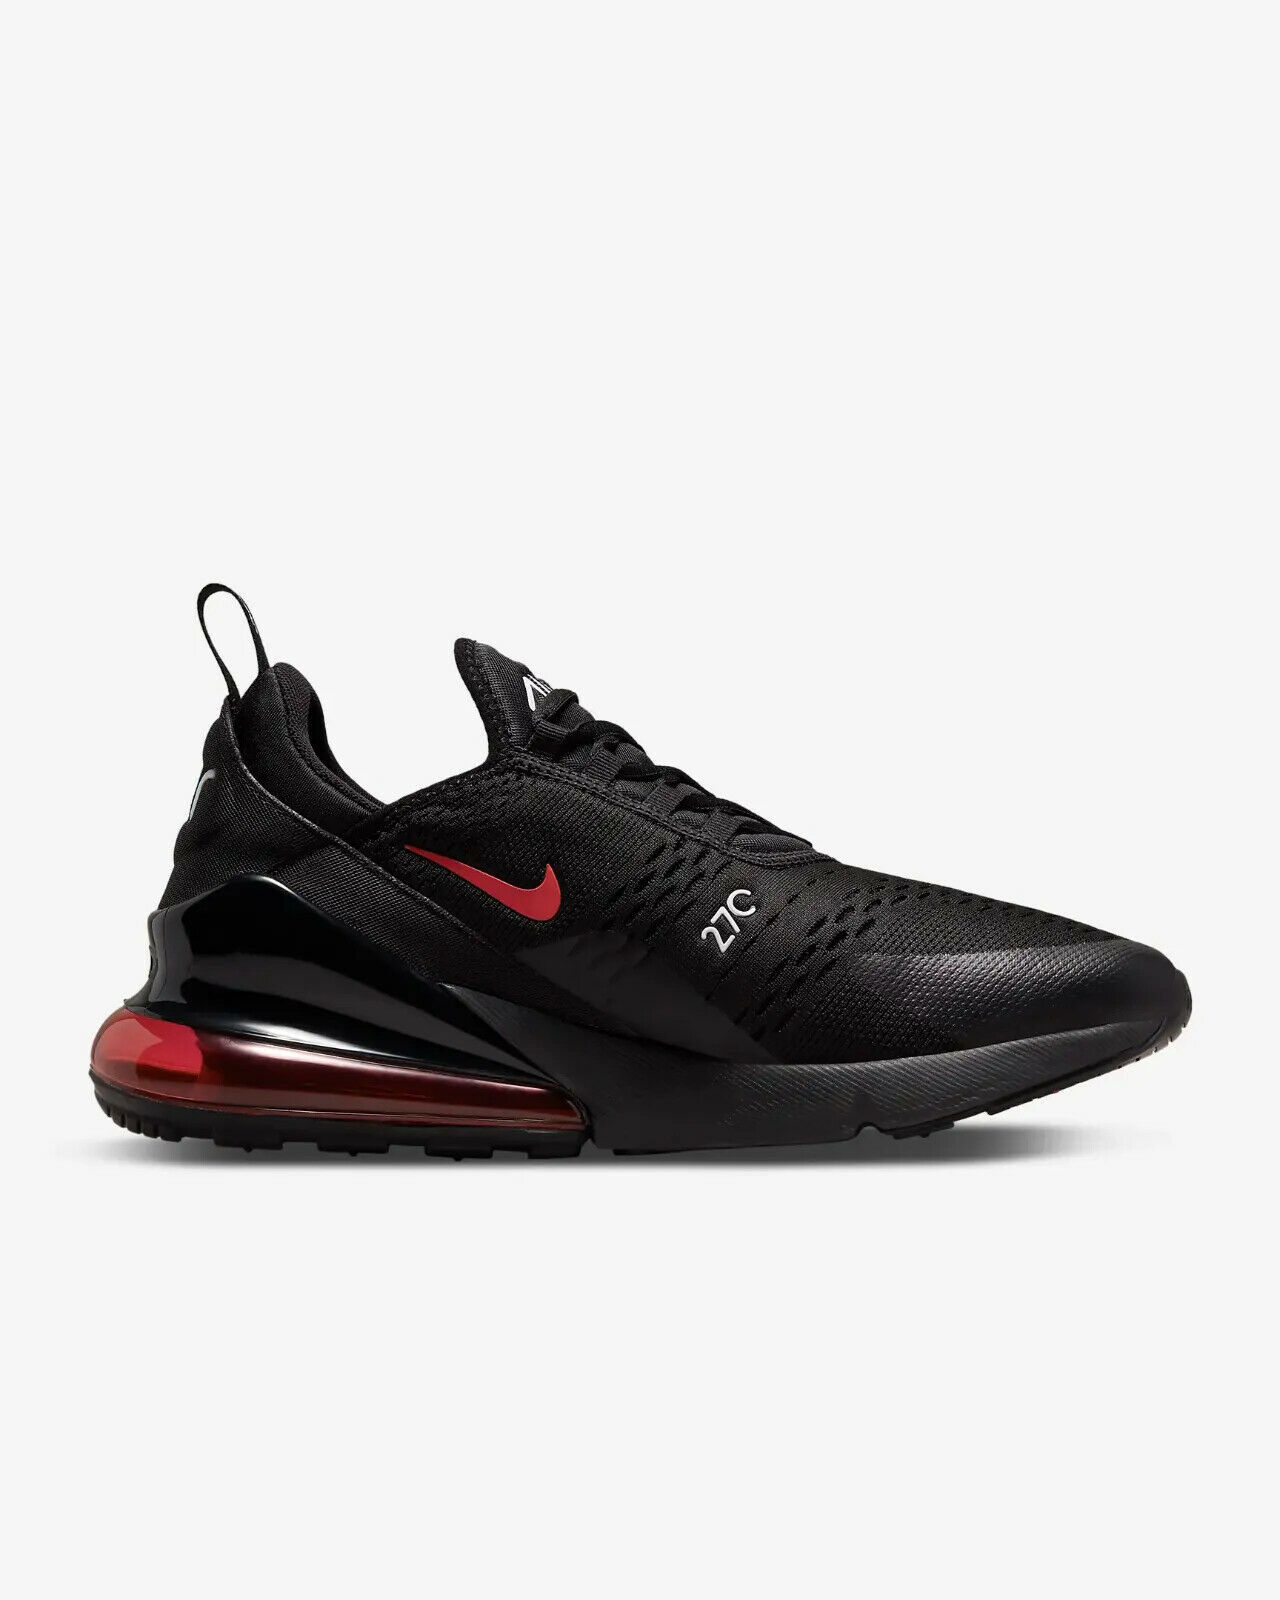 Nike Air Max 270 Men's Trainers in Black and Red